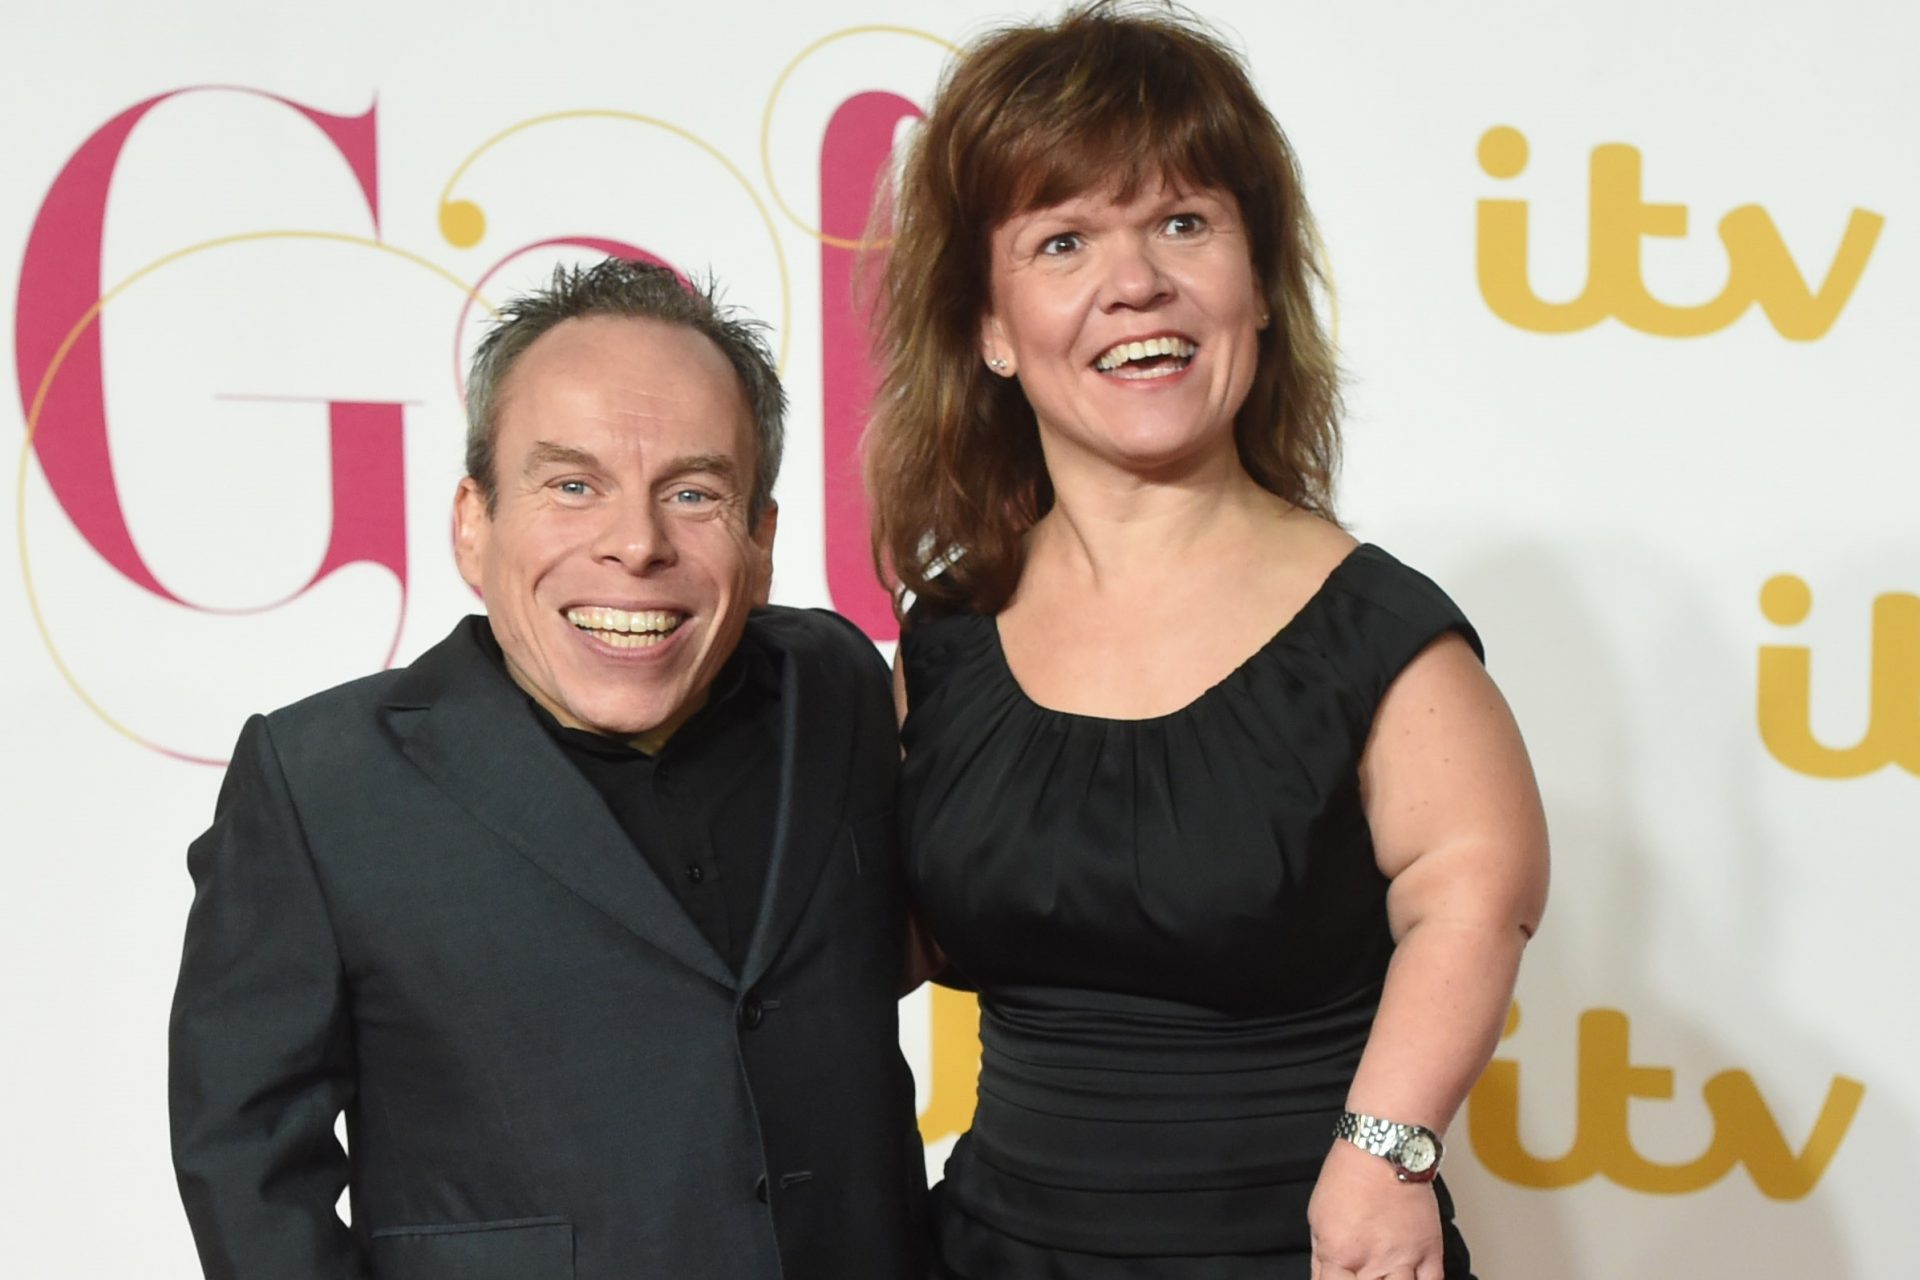 Warwick Davis pays tribute to his wife, Samantha, dead at 53